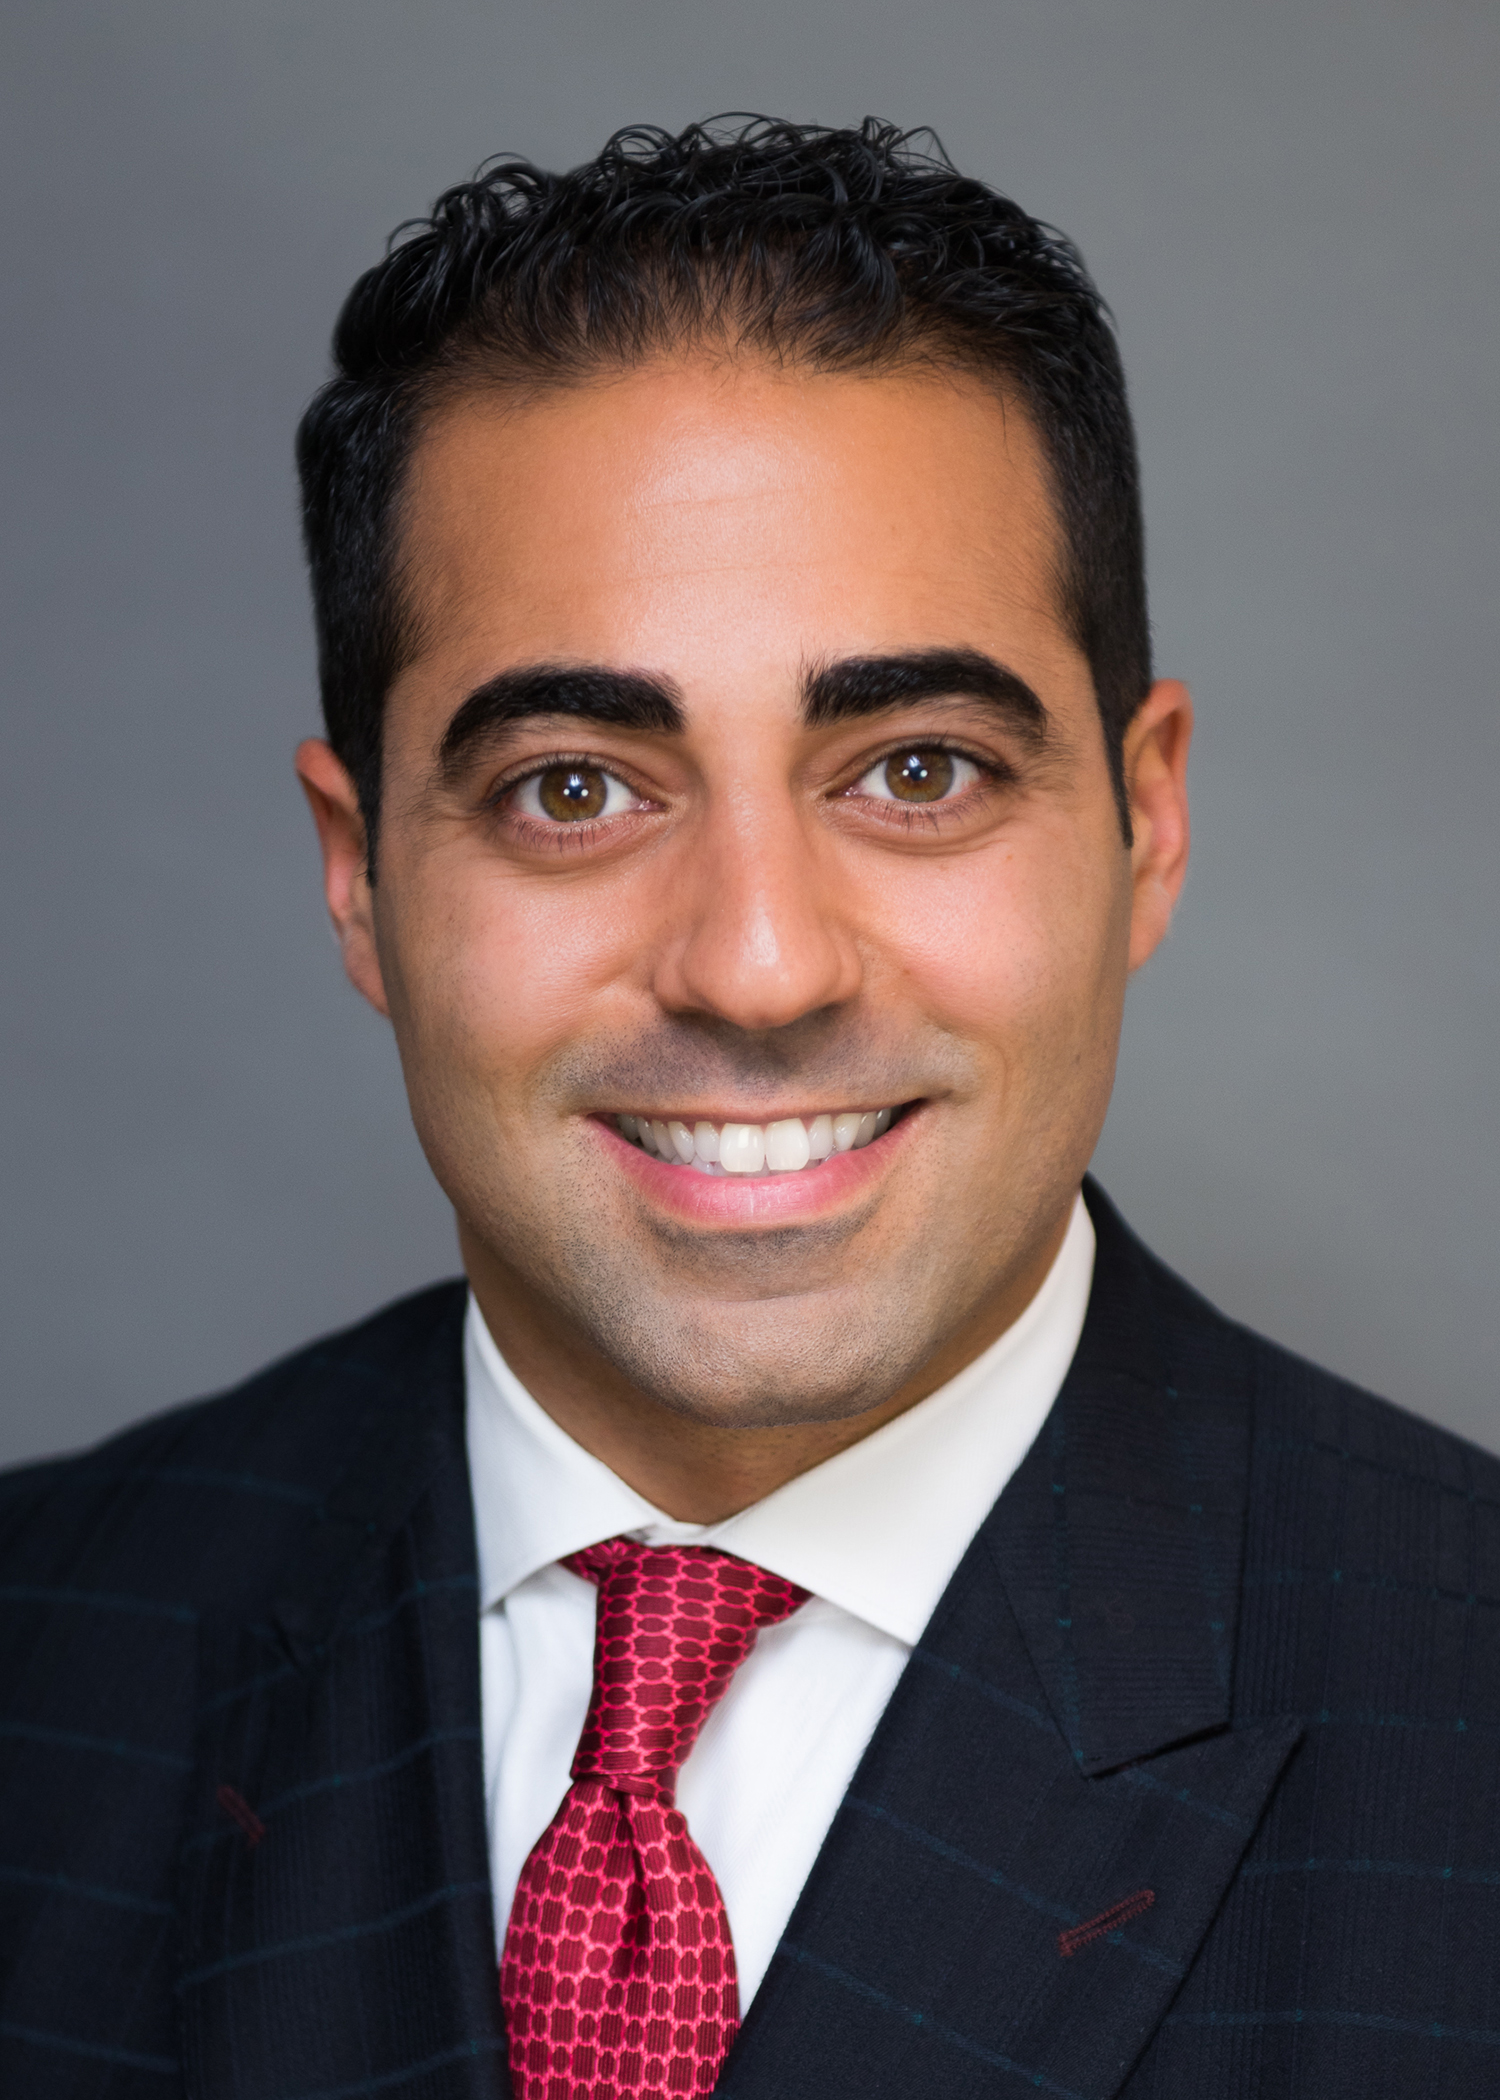 Adam Bakhash joined Wilmington Trust's Los Angeles office as a senior private client advisor.